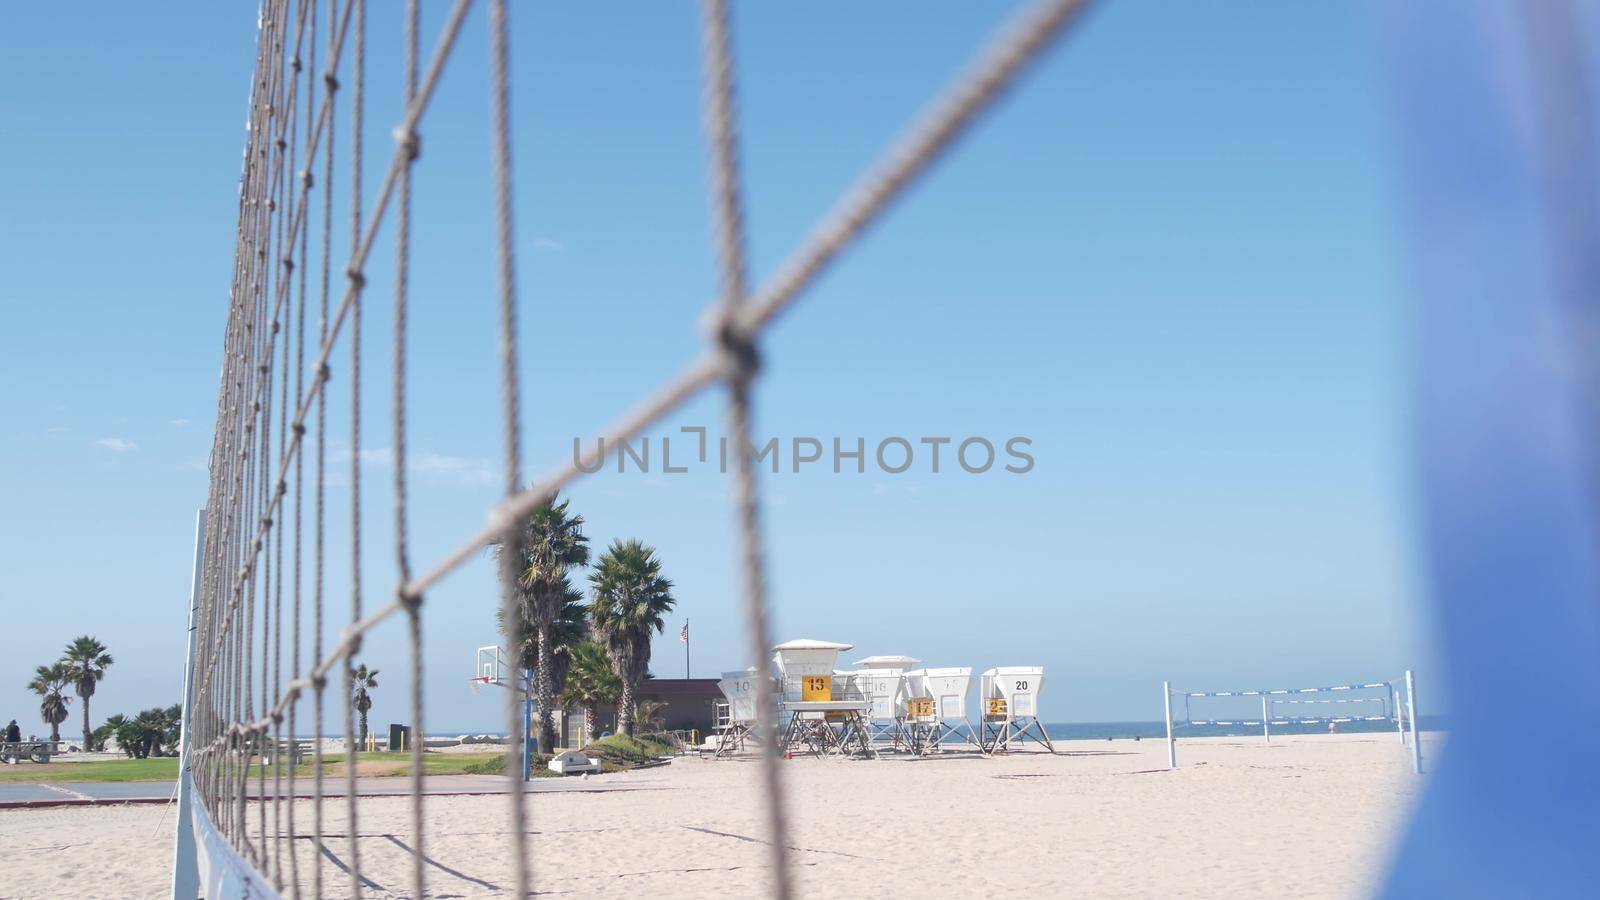 Volley ball net on court for volleyball game on beach, California coast, USA. by DogoraSun